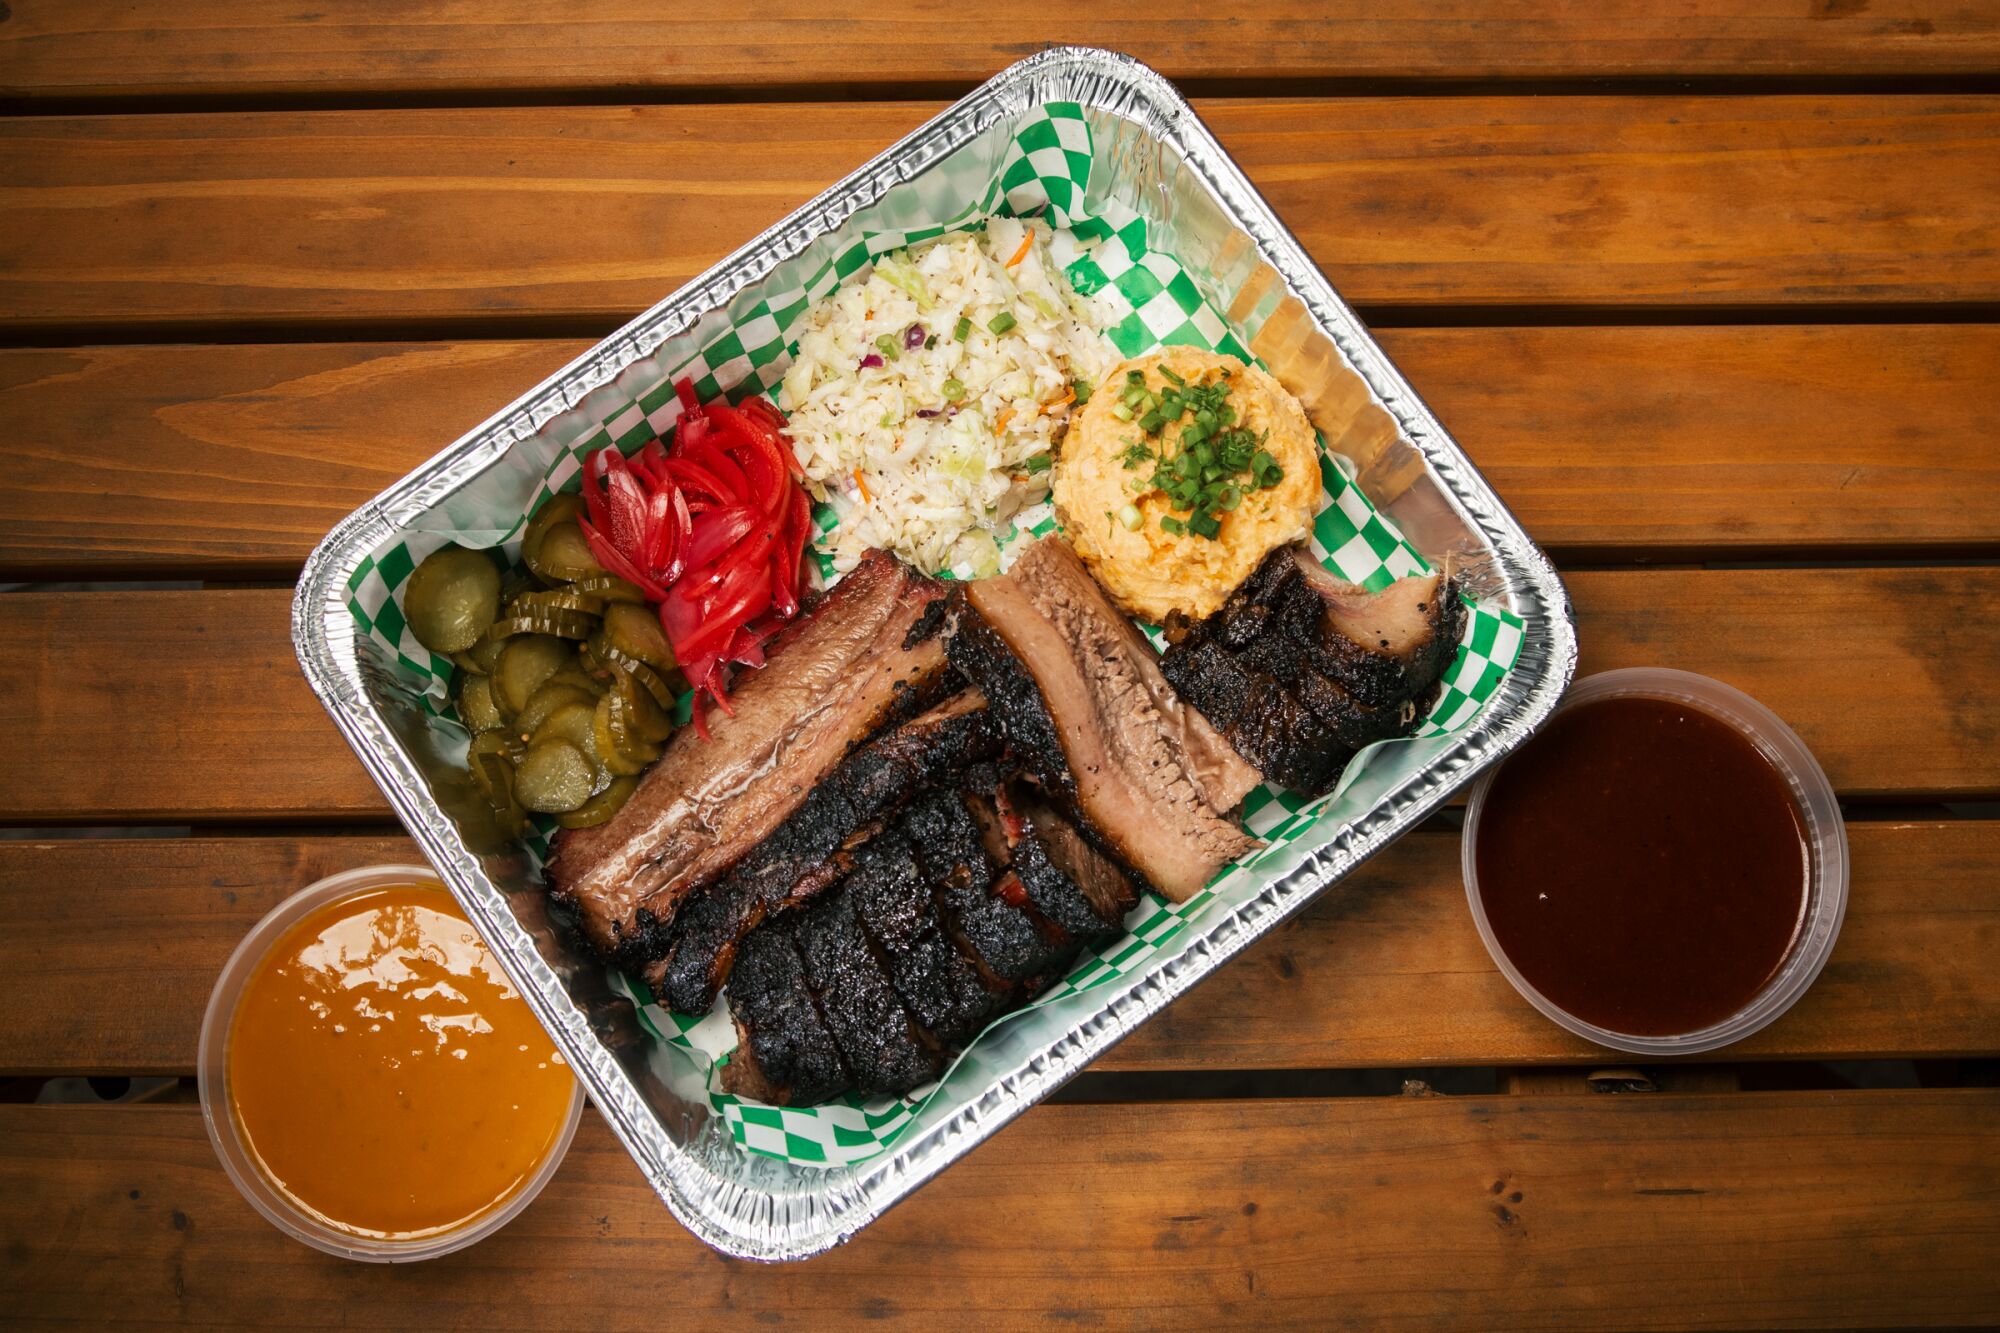 A tray with brisket, side dishes and containers of sauce.